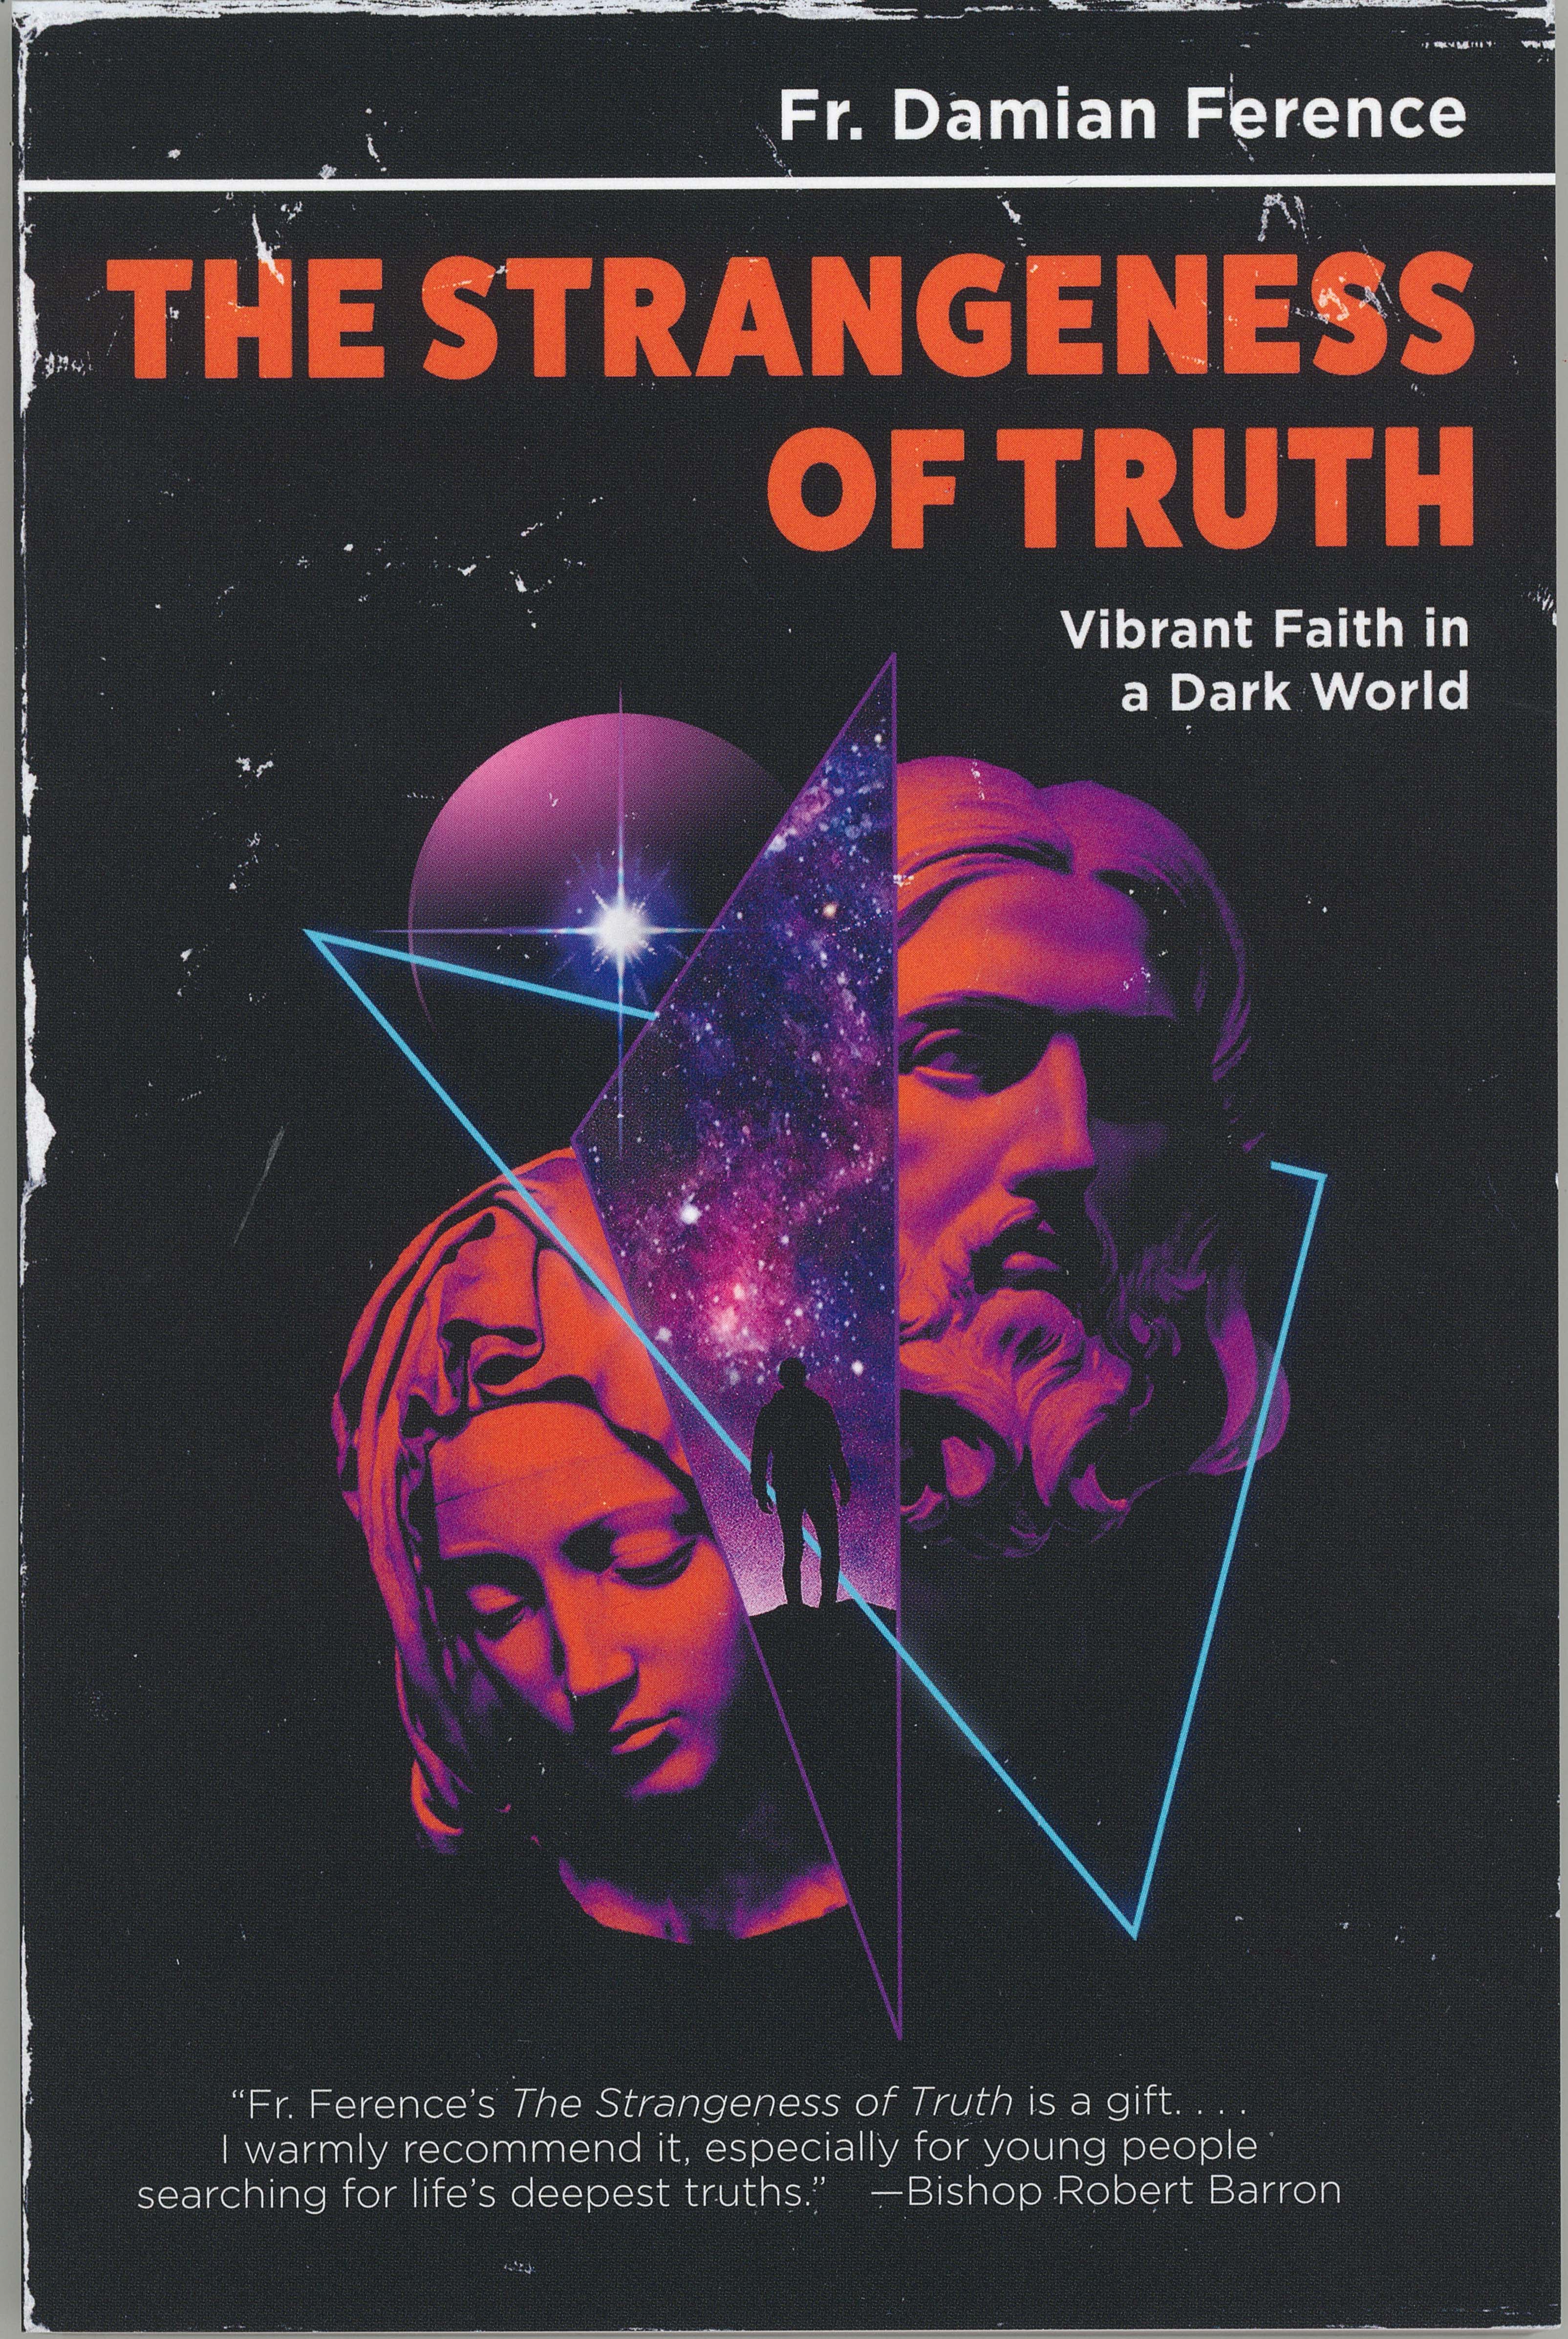 The Strangeness of Truth - Vibrant Faith in a Dark World by Fr. Damian Ference ISBN: 0819891266 EAN: 9780819891266